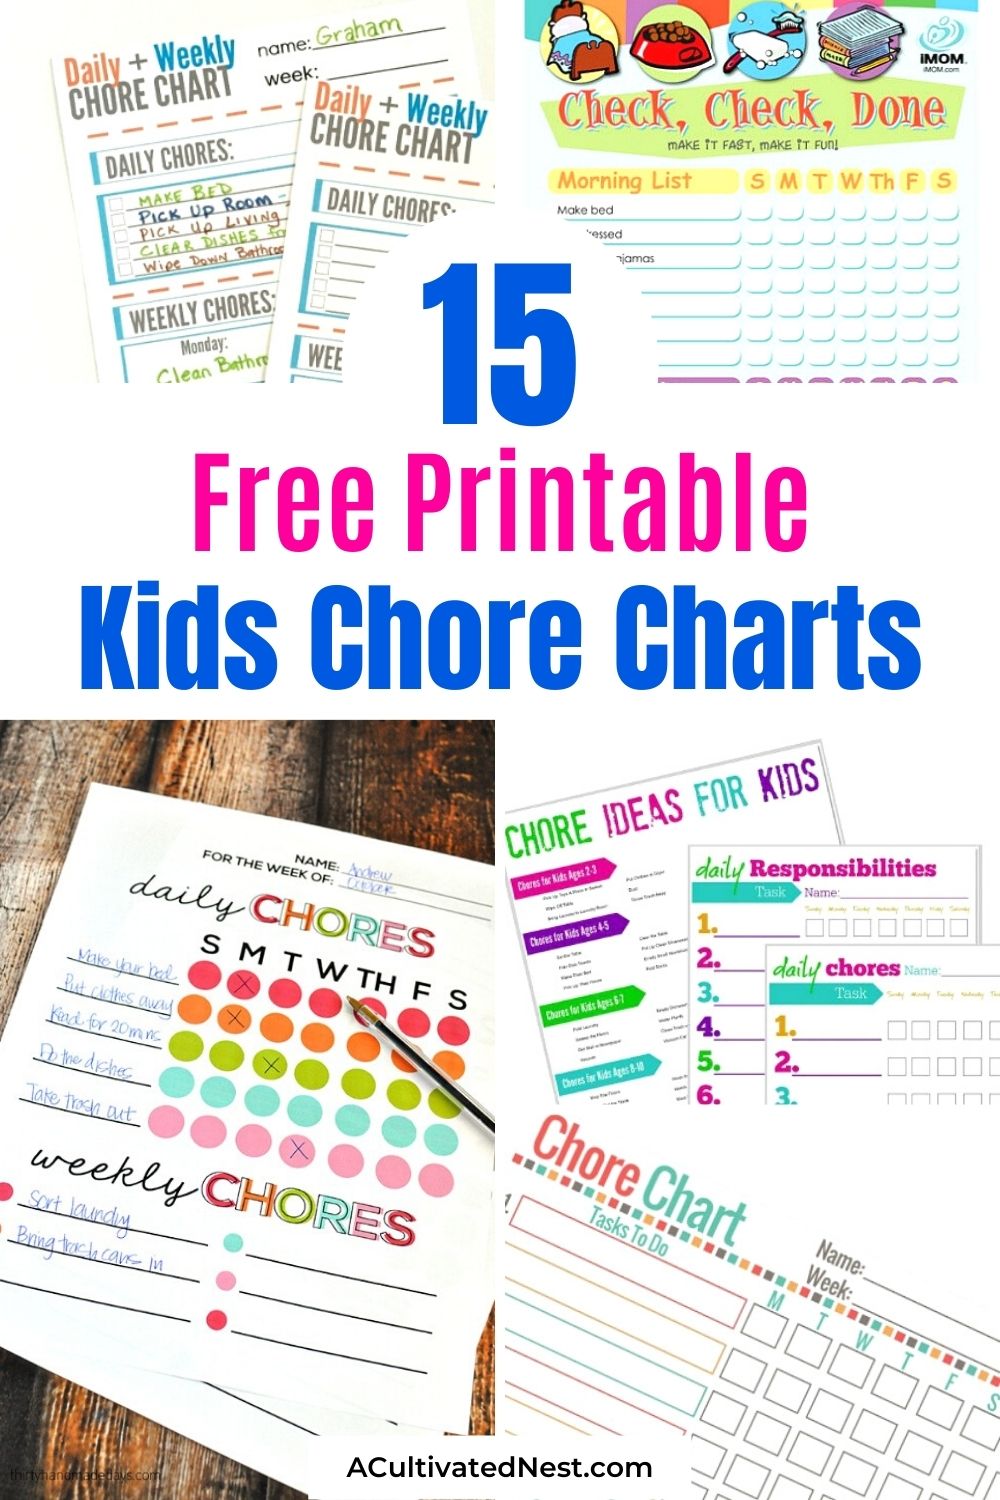 15 Free Printable Chore Charts for Kids- A great way to motivated your kids to do their chores is with one of these free printable chore charts for kids! | #freePrintables #printablesForKids #kidsChoreCharts #kidsChores #ACultivatedNest